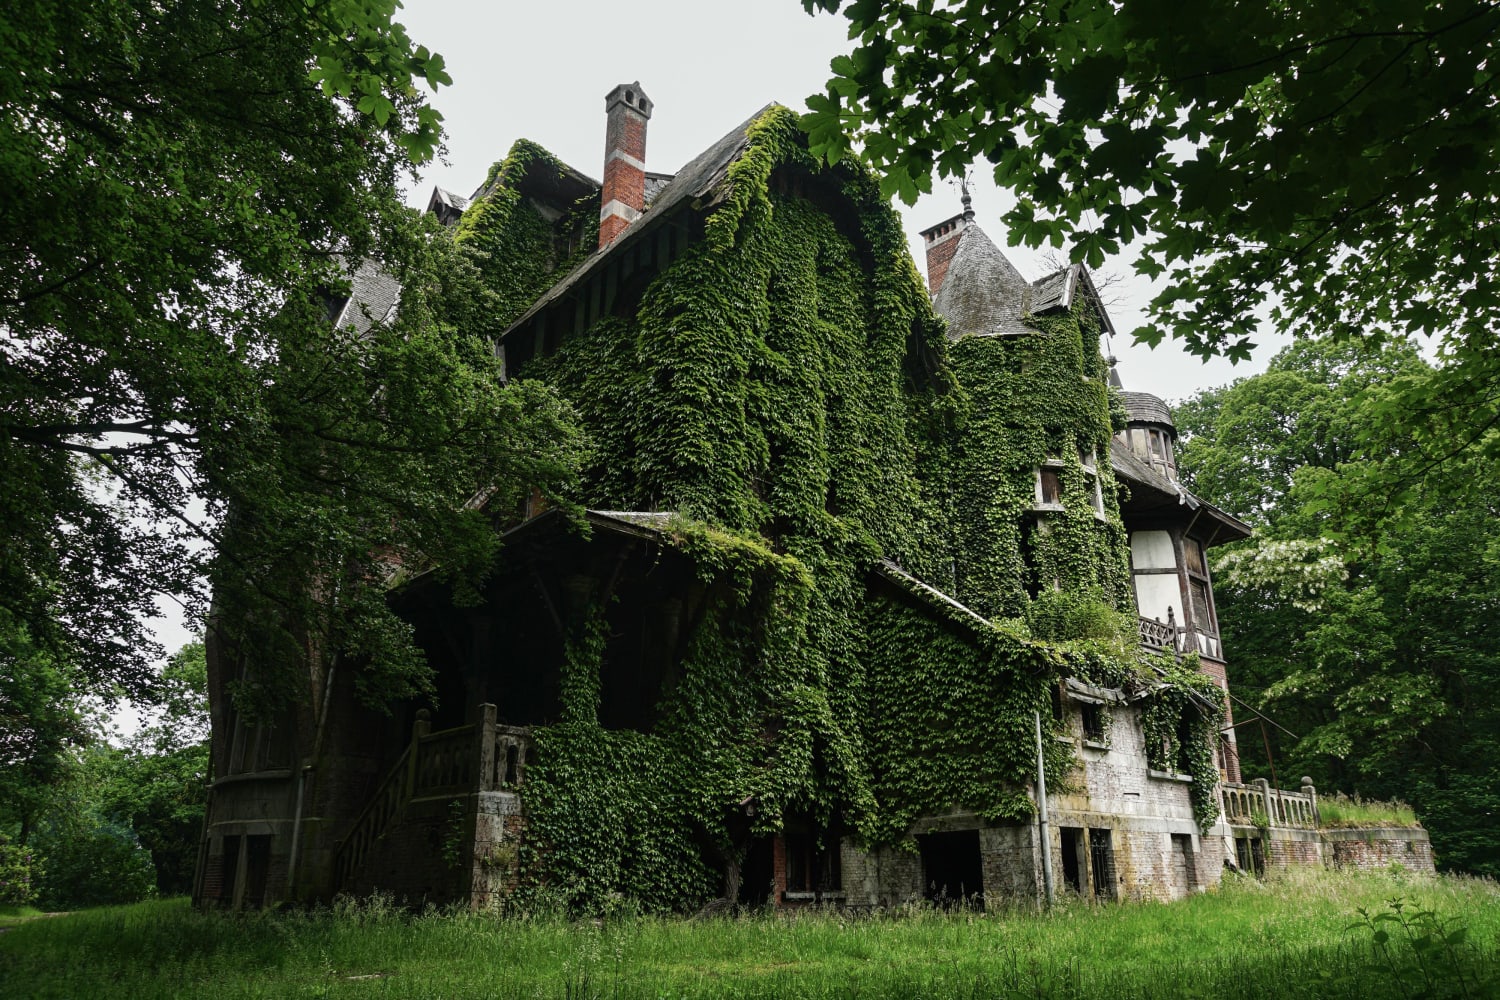 Abandoned 110-year old villa in Belgium. Almost fully overgrown.